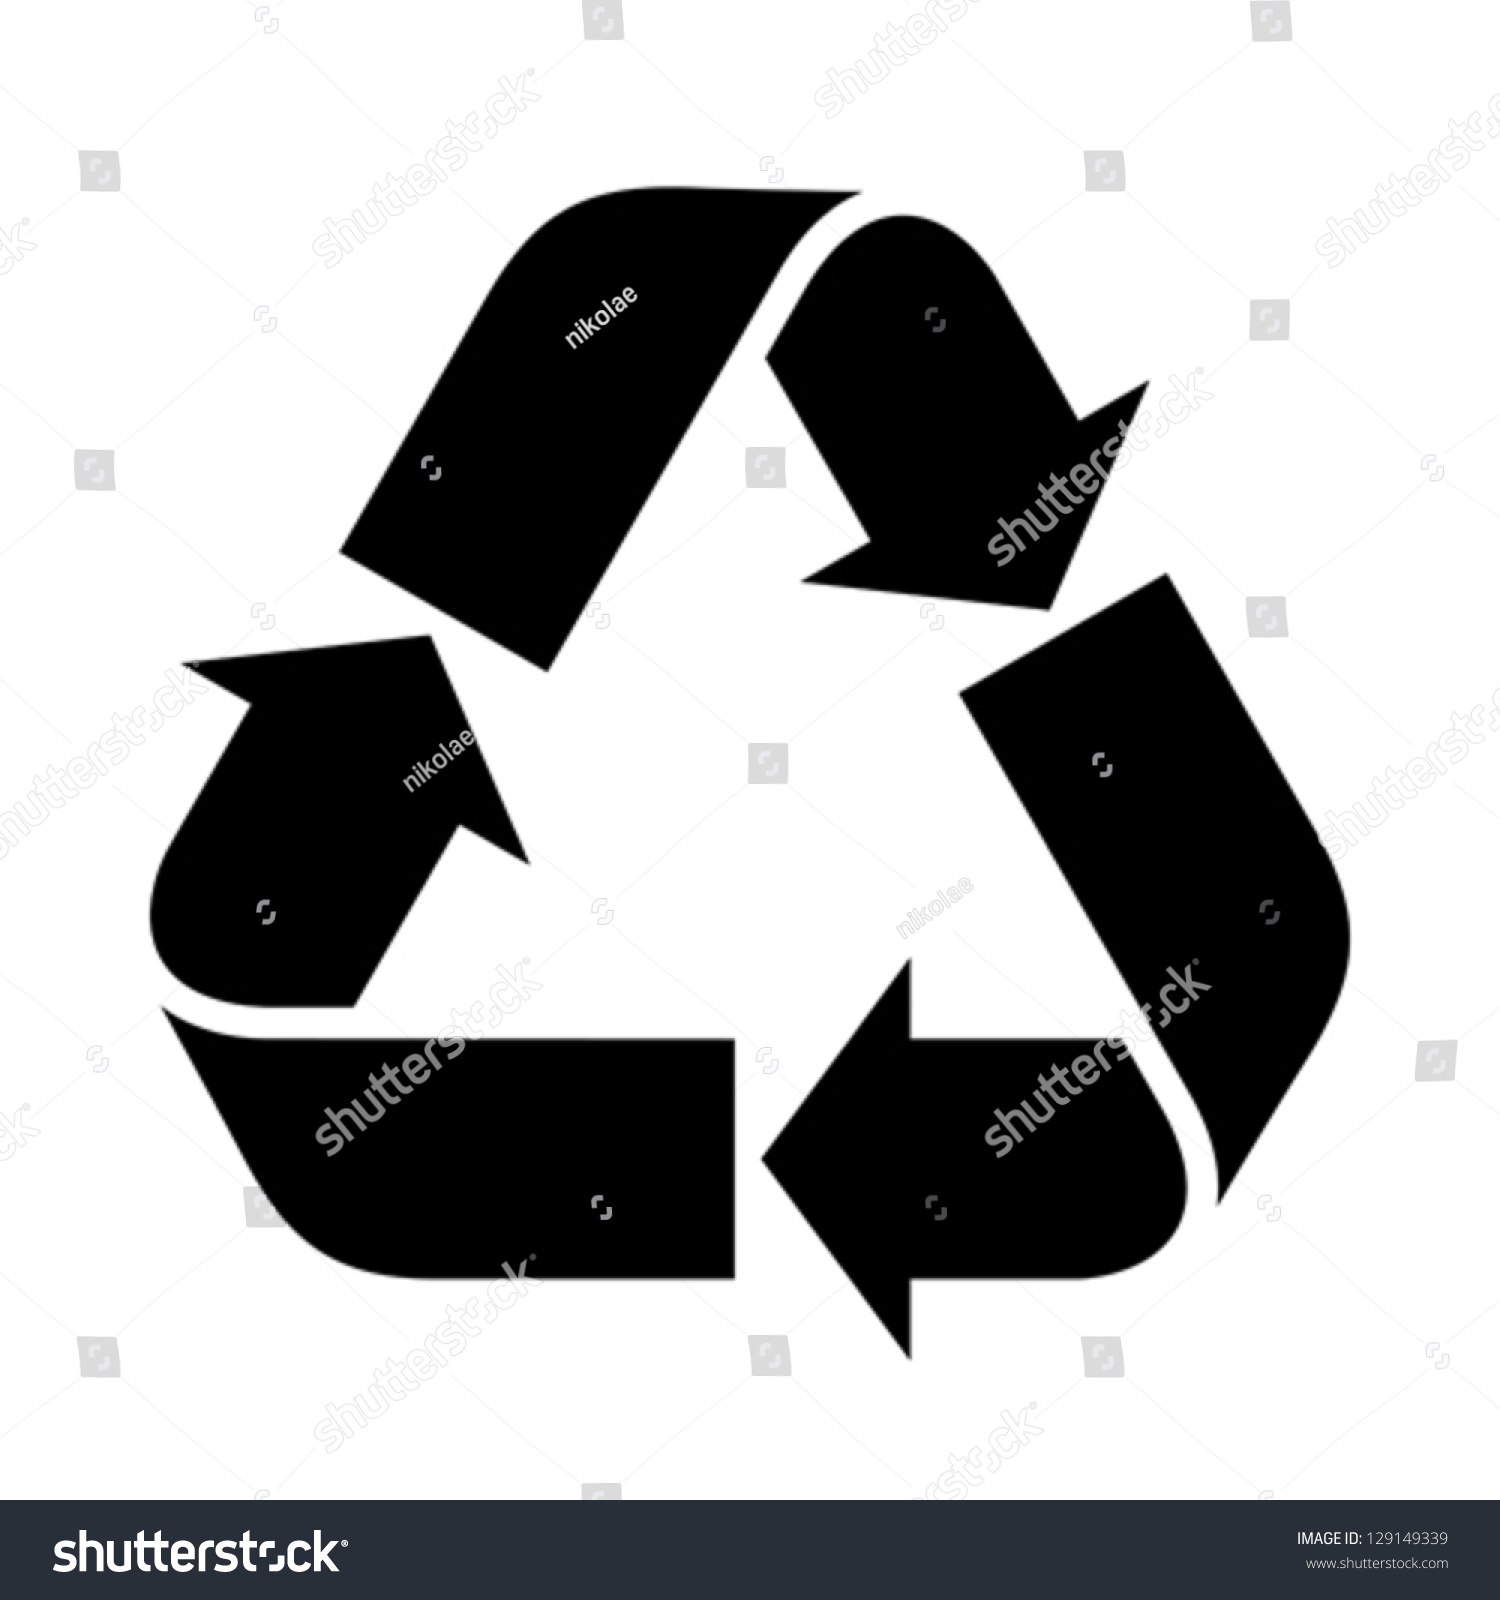 Recycle sign isolated on white background #129149339